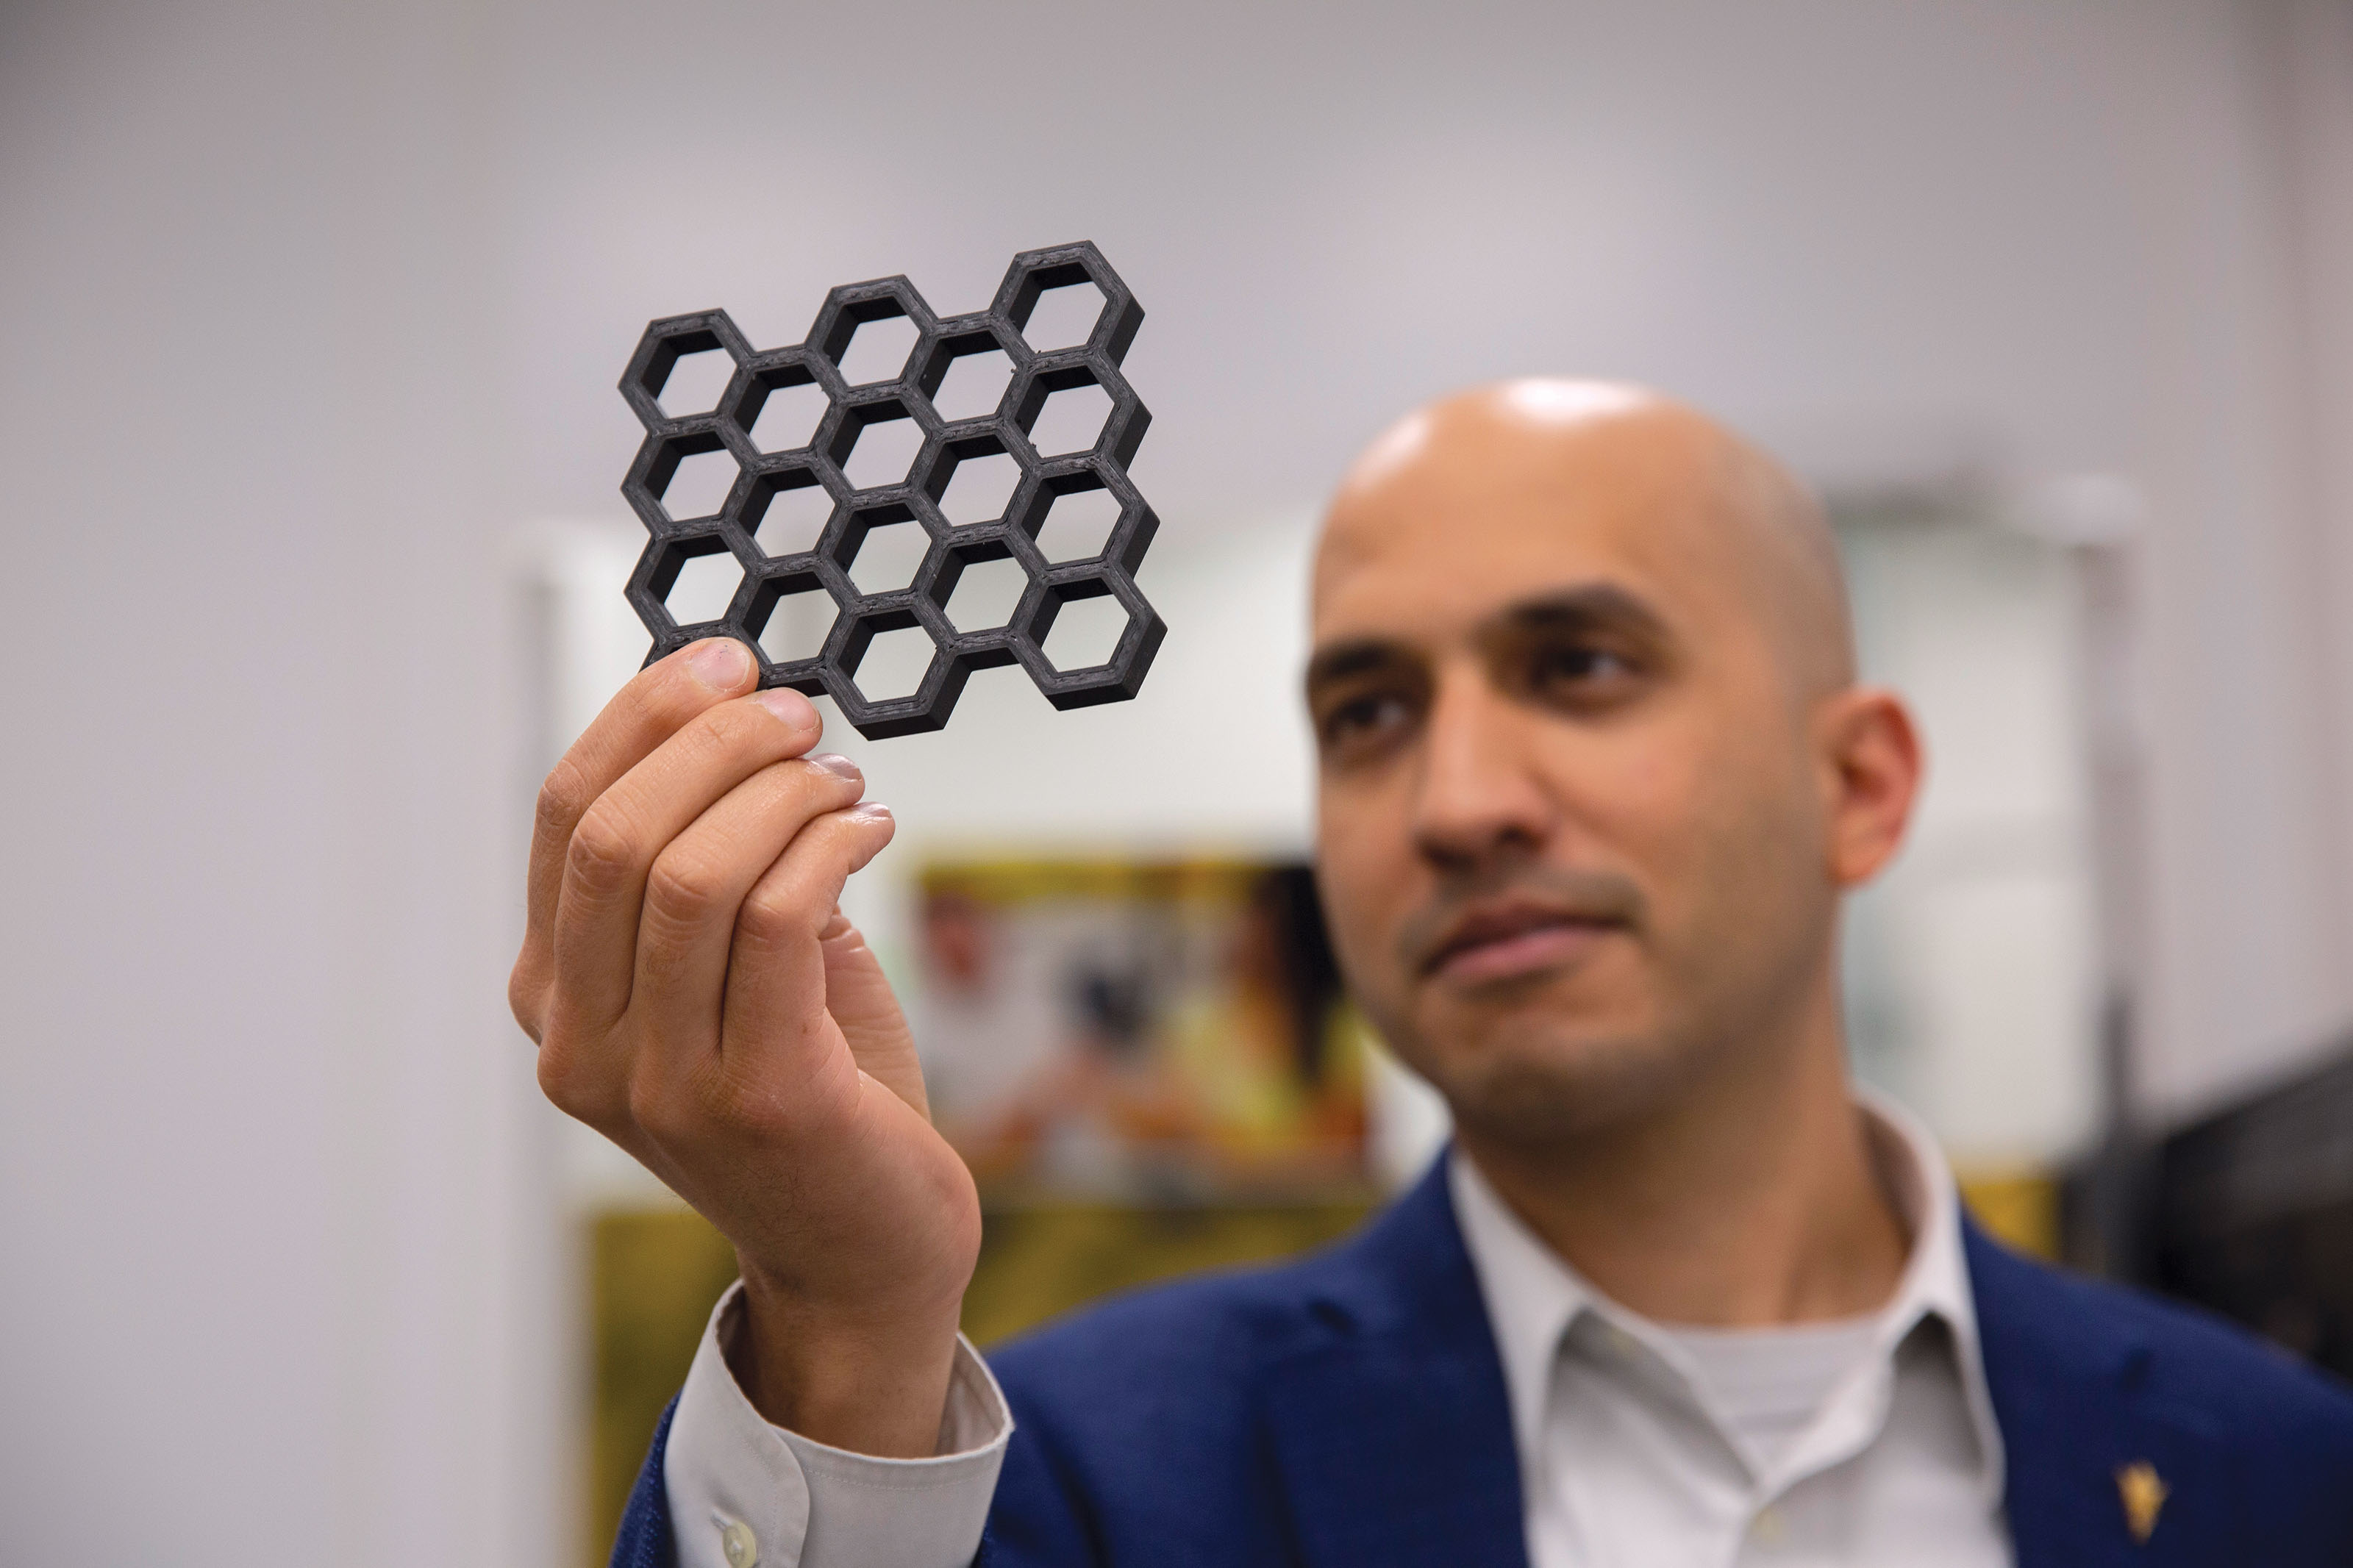 Dhruv Bhate holds a 3D printed hexagonal "honeycomb" shaped object